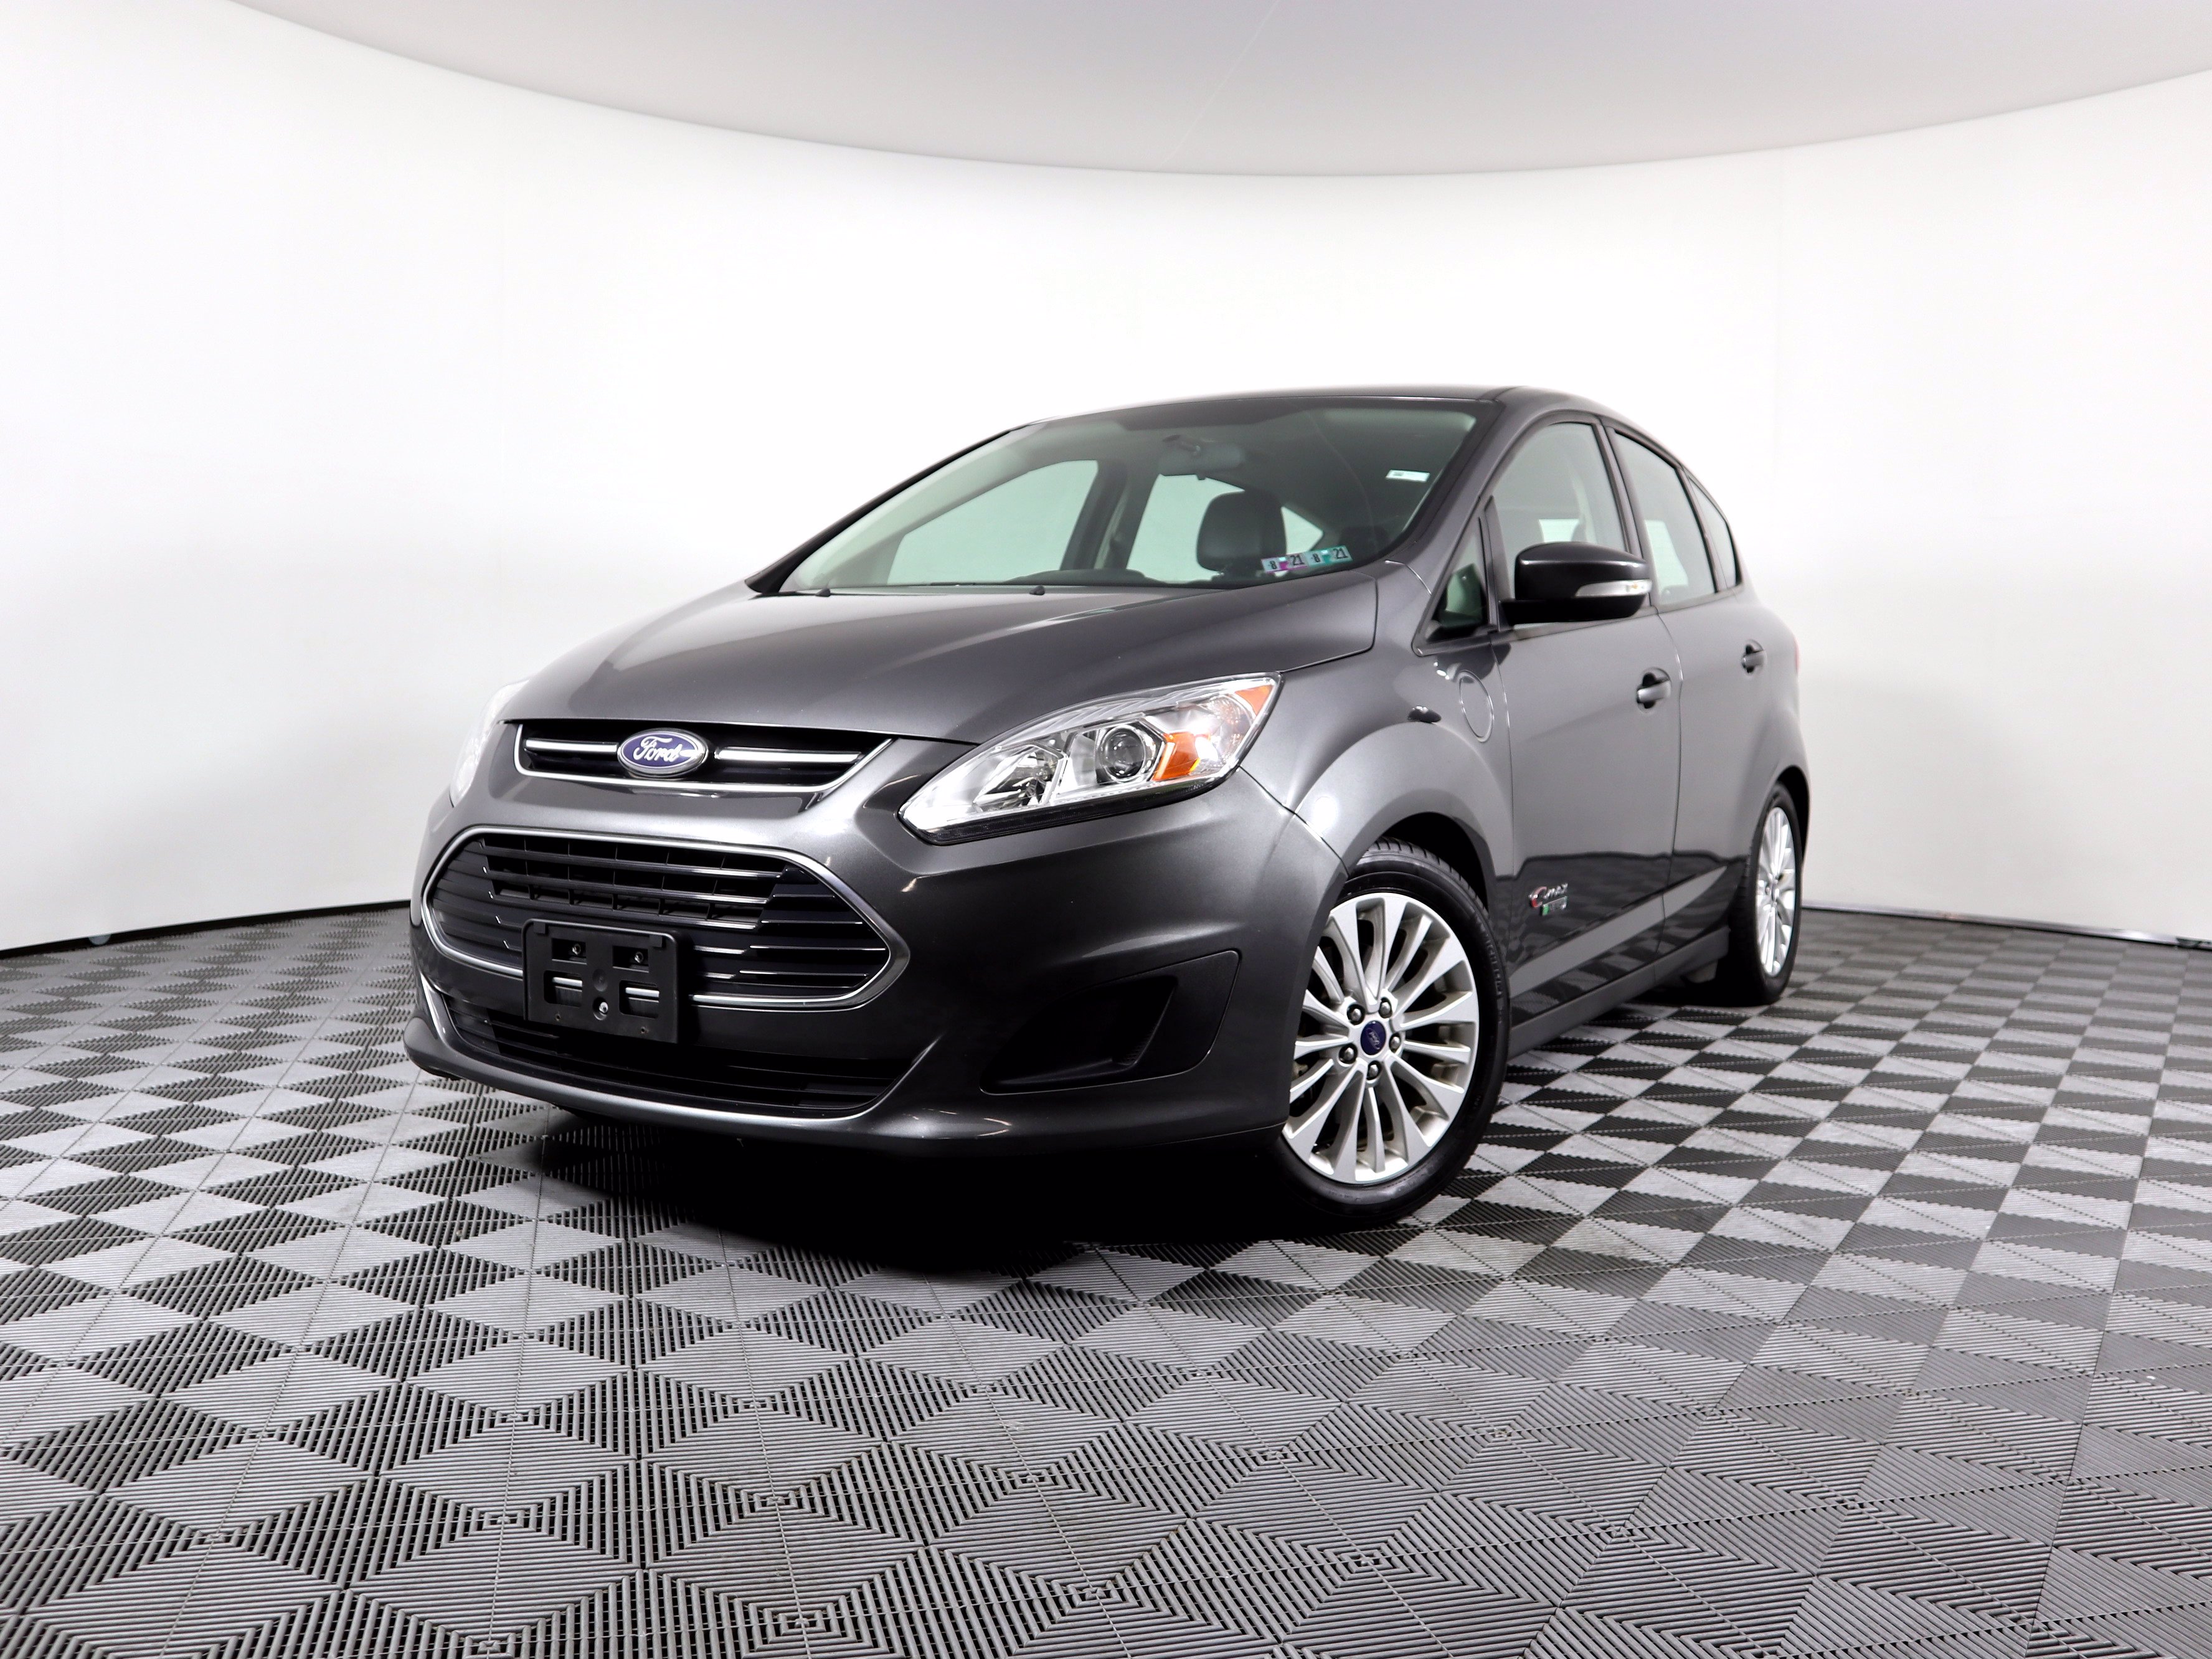 PreOwned 2017 Ford CMax Energi SE Hatchback in